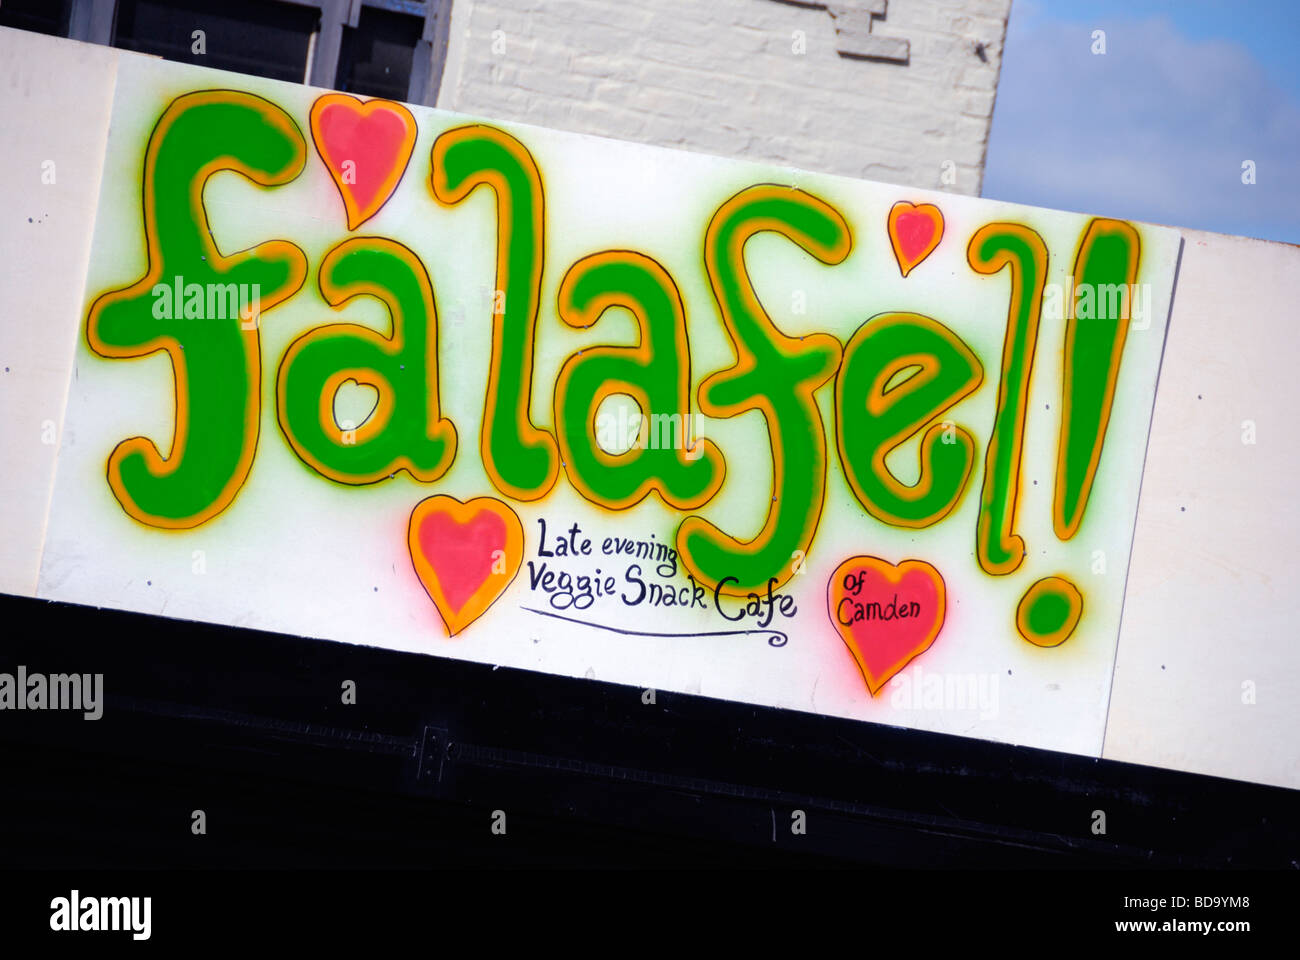 Falafel sign above Middle Eastern restaurant and take away Stock Photo